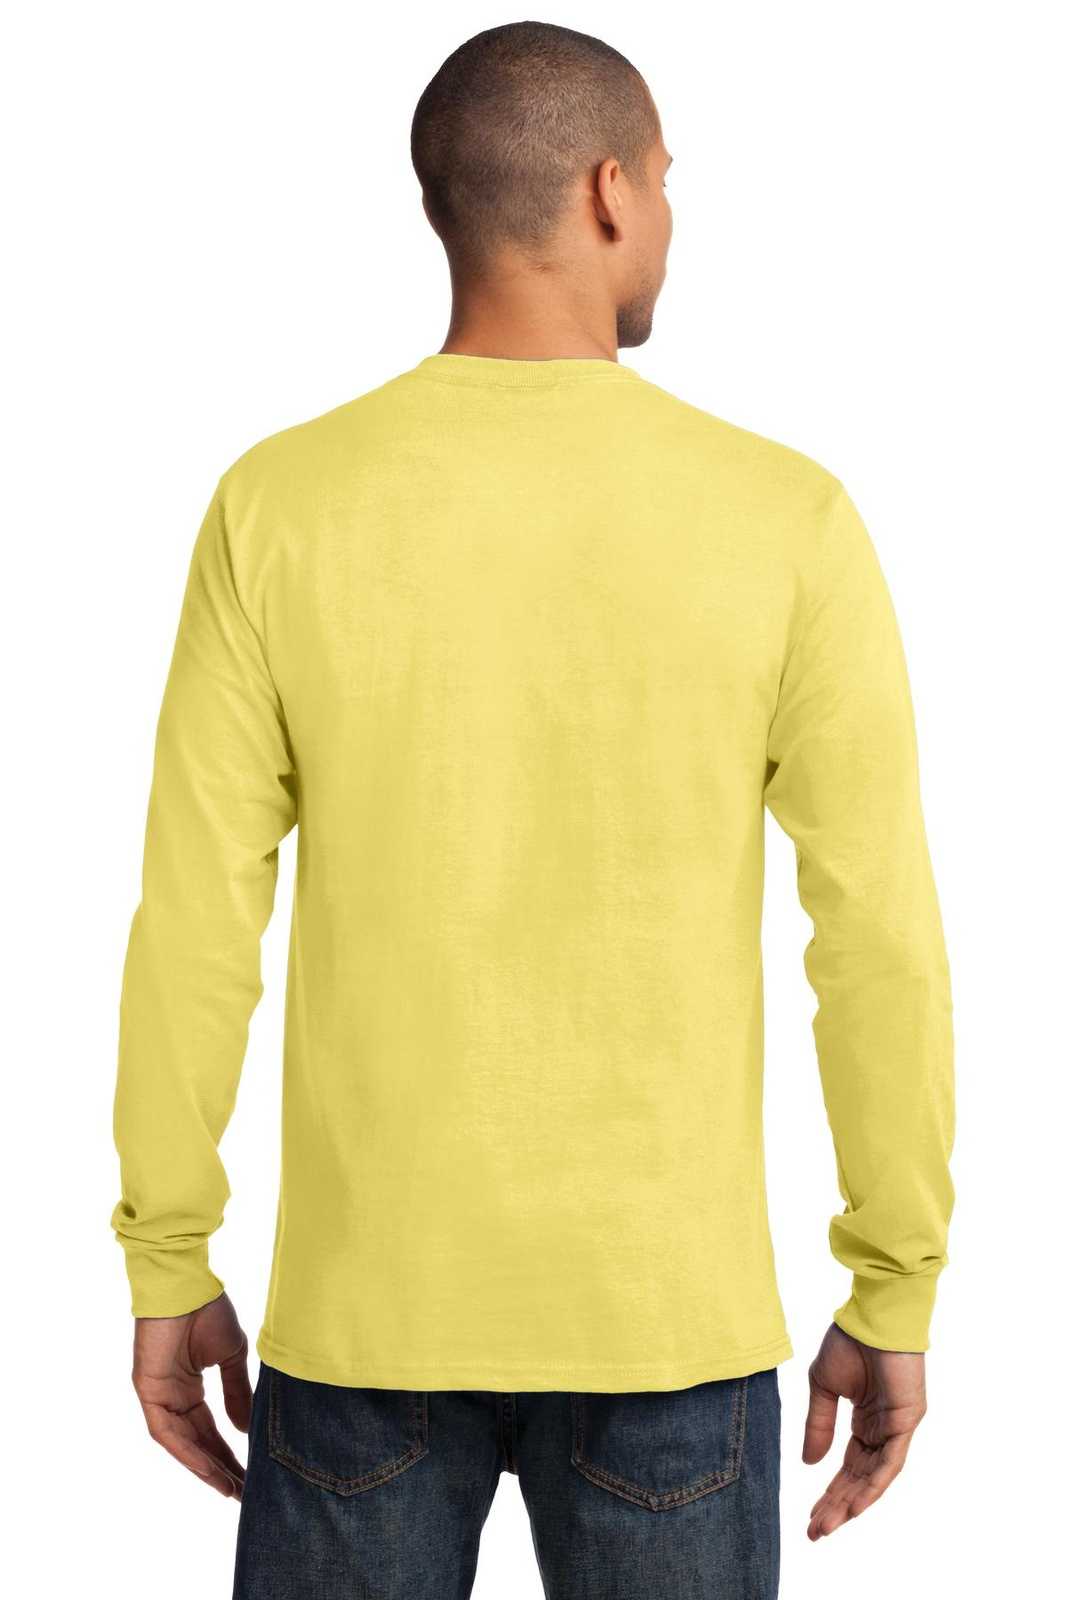 Port & Company PC61LST Tall Long Sleeve Essential Tee - Yellow - HIT a Double - 1